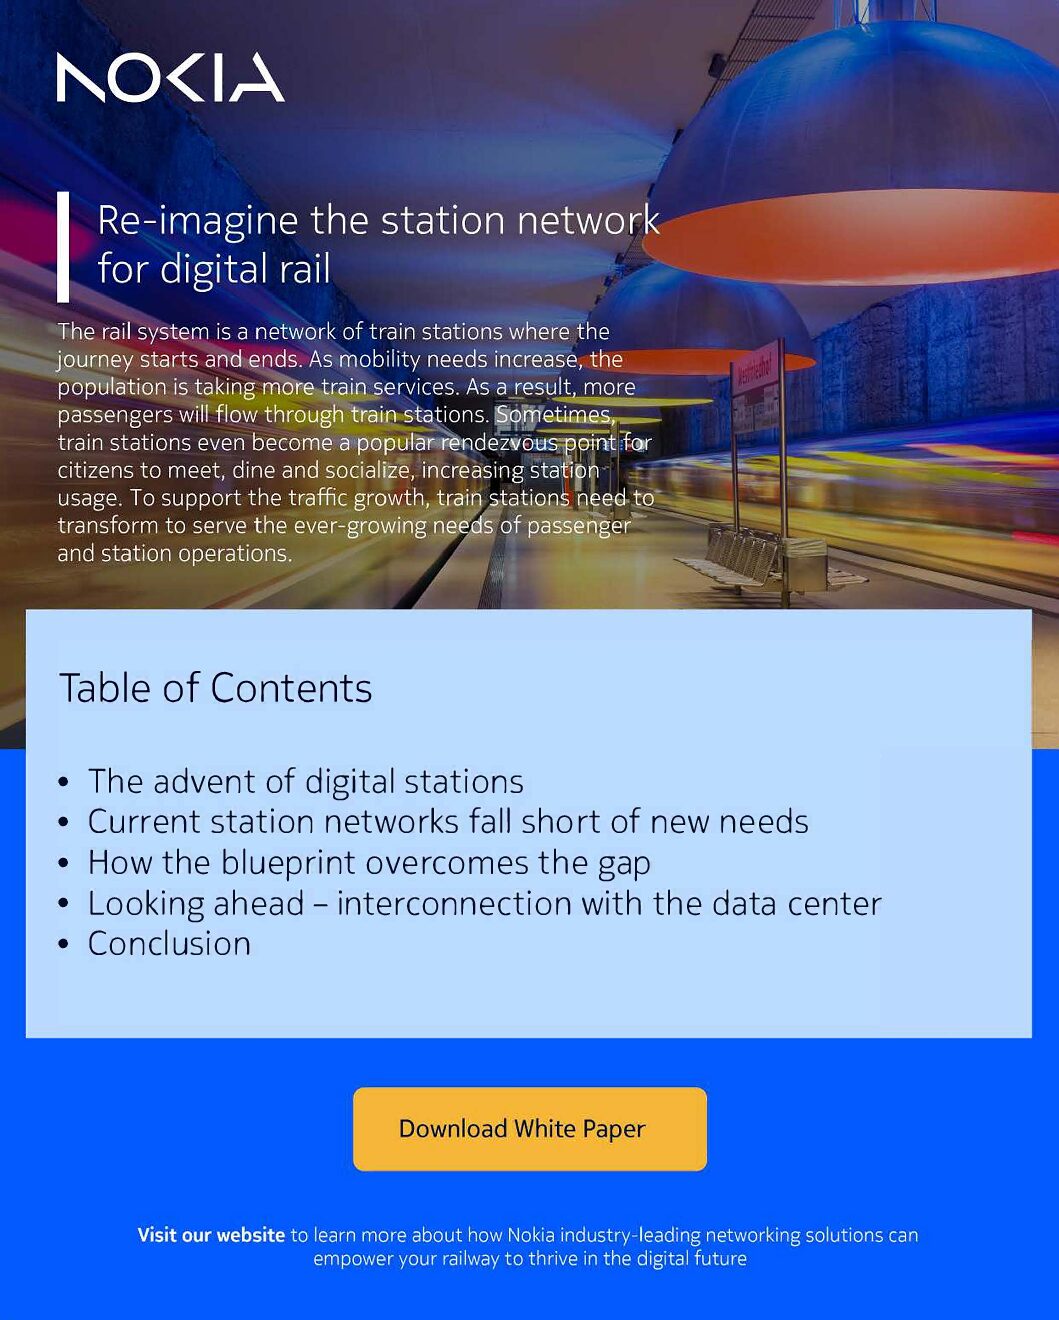 Nokia | Re-imagine the Station Network for Digital Rail